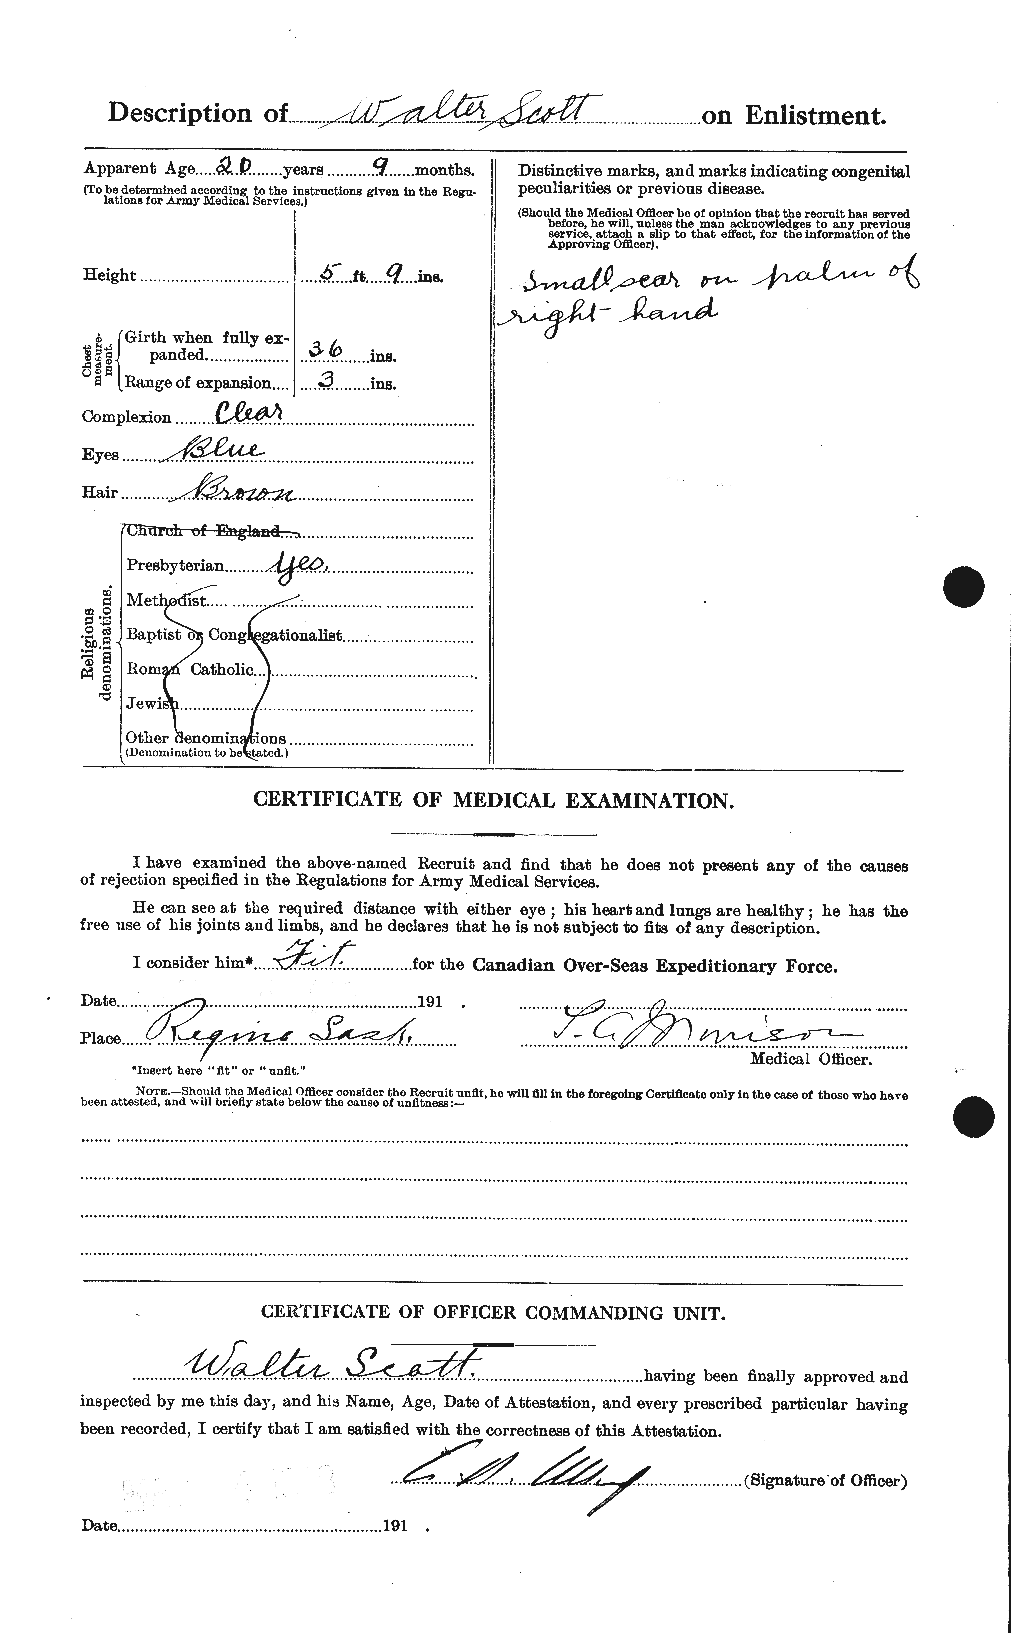 Personnel Records of the First World War - CEF 088014b